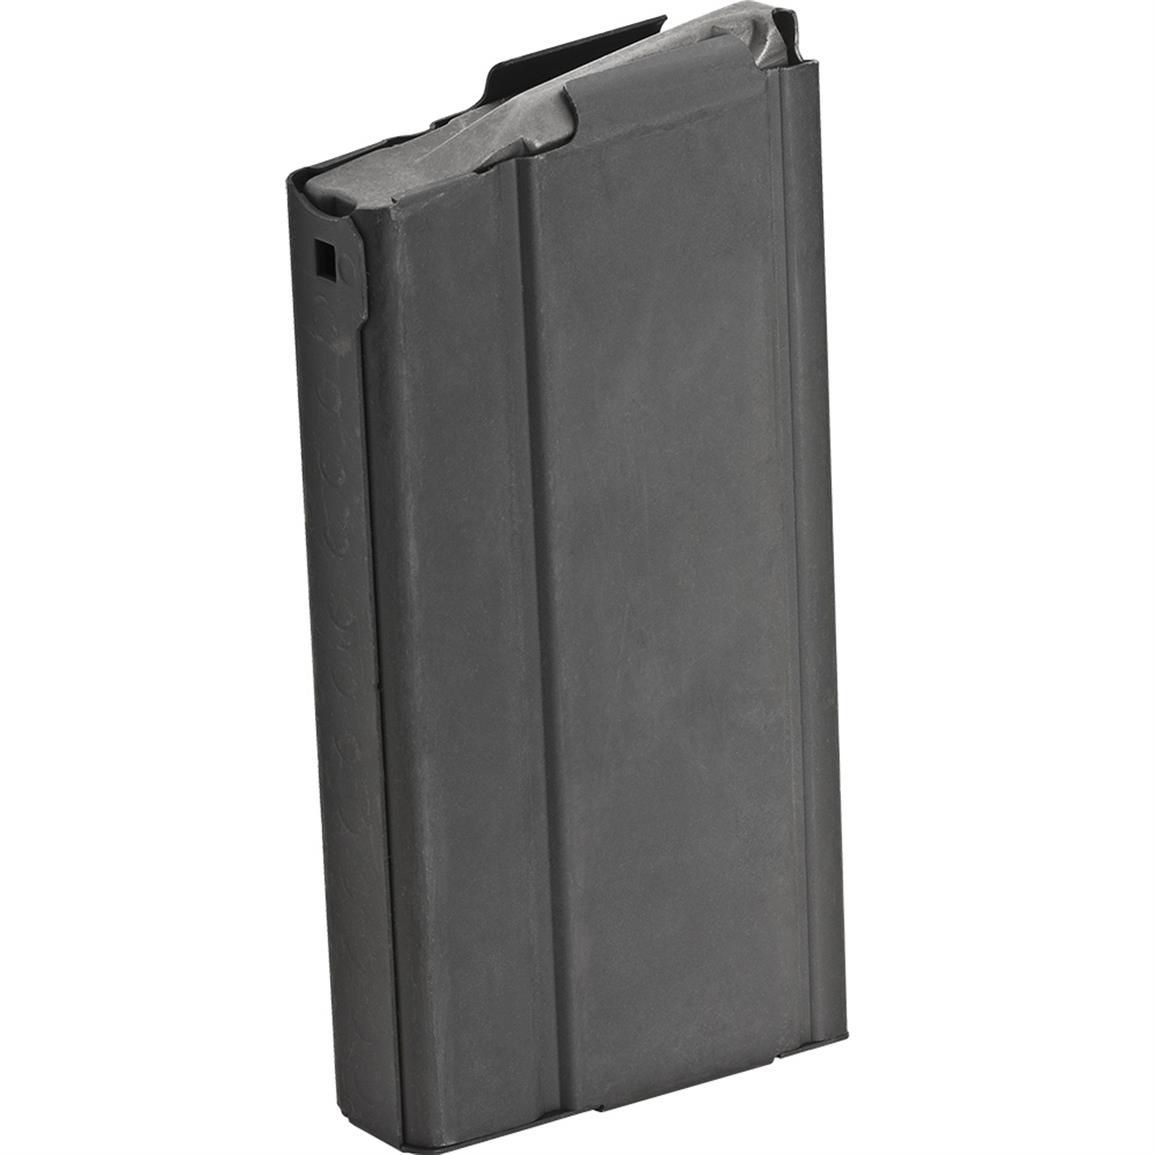 Springfield M1A/M14 Magazine, .308 Winchester, 20 Rounds